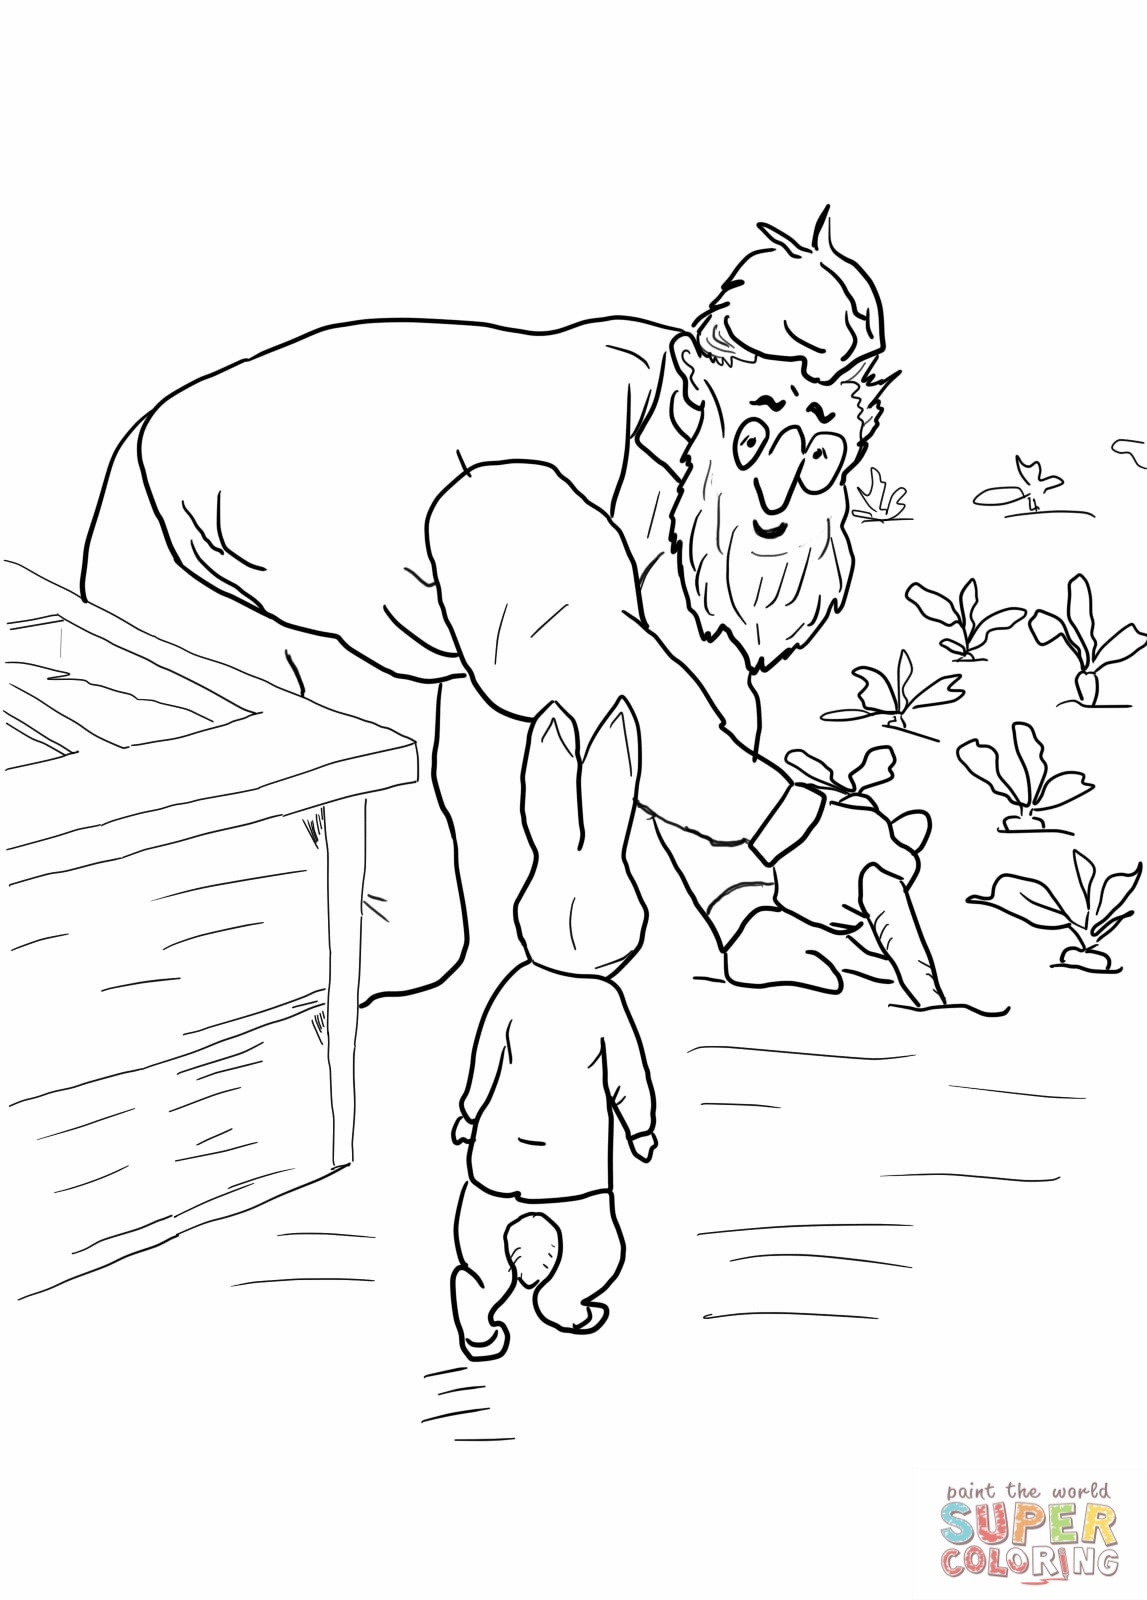 Peter Rabbit Coloring Pages - Coloring Pages For Kids - Free Printable Peter Rabbit Coloring Pages